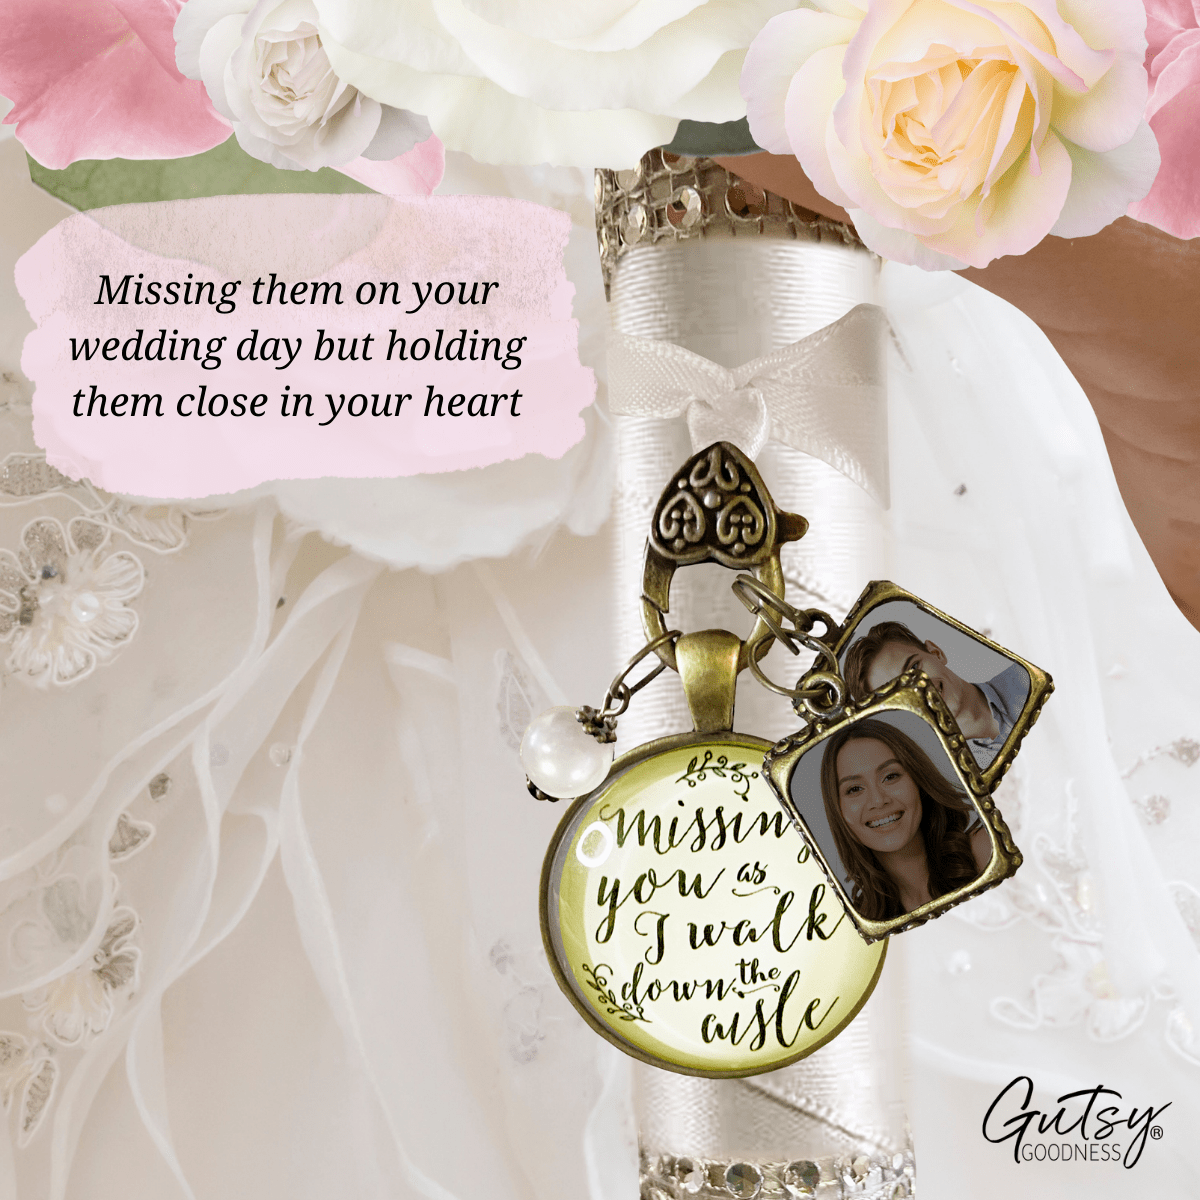 Missing You As I Walk Down The Aisle Wedding Bouquet Memory Charm Memorial 2 Frames - Gutsy Goodness Handmade Jewelry Gifts